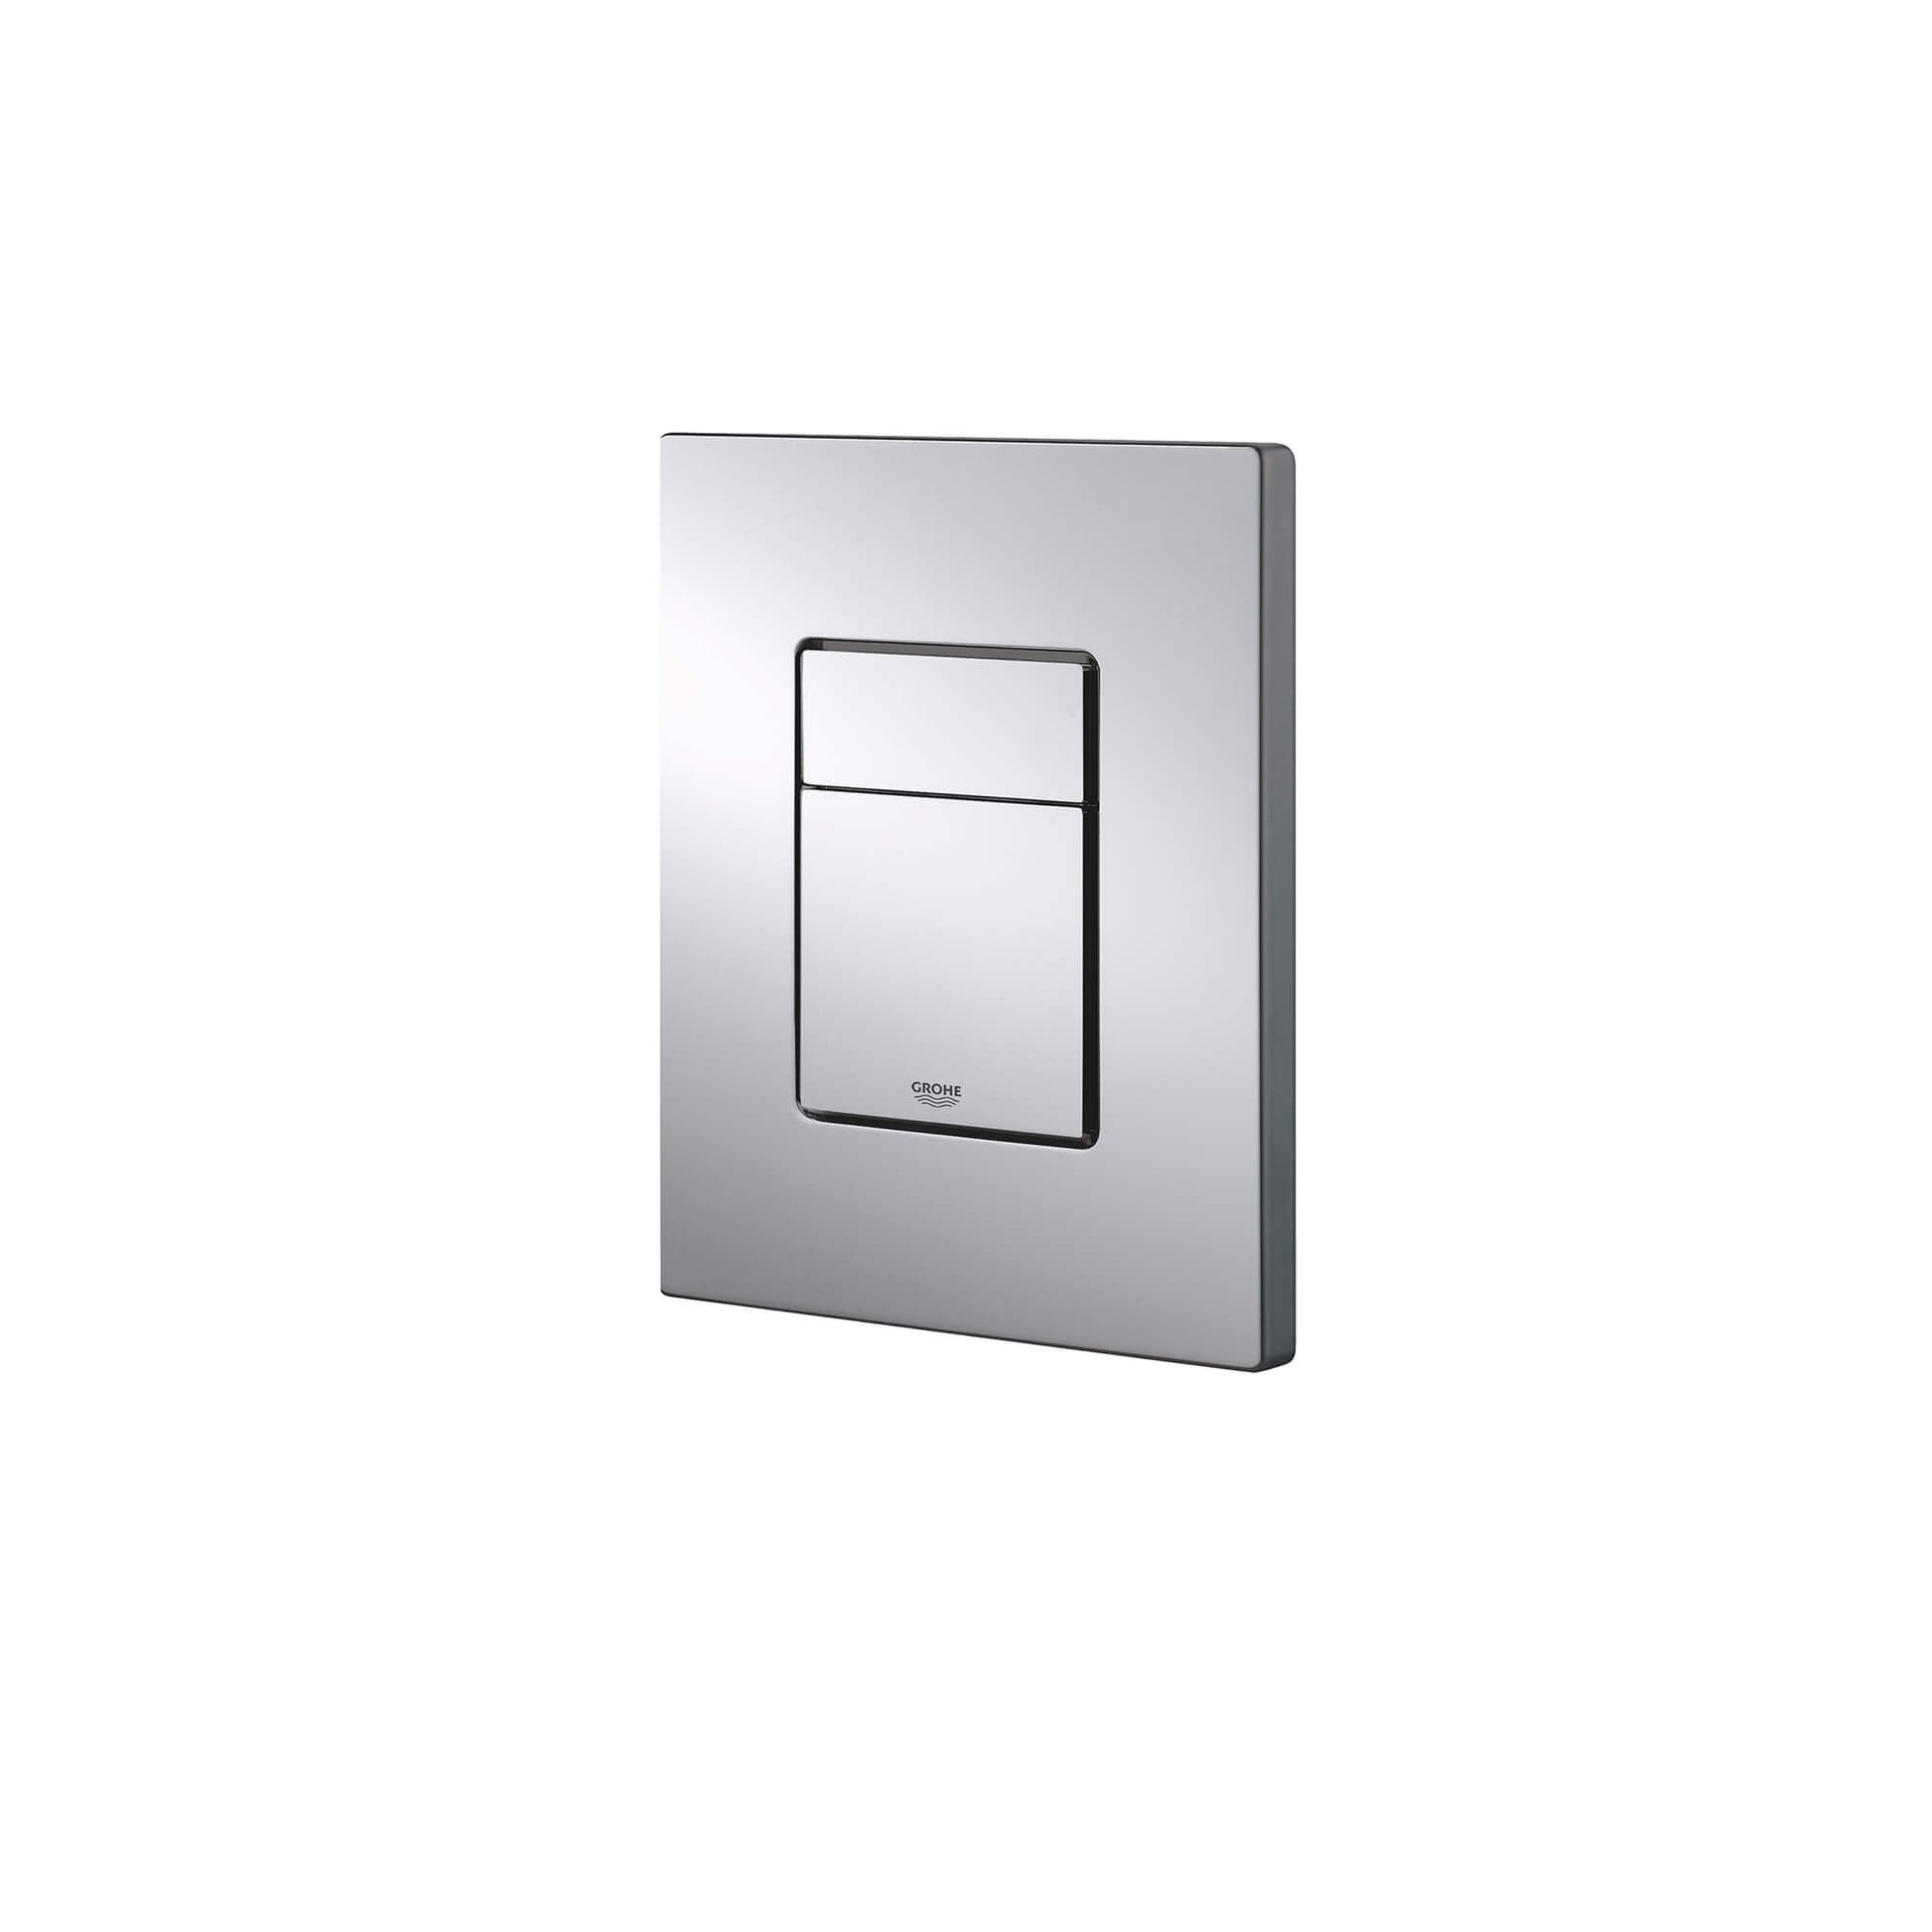 GROHE 38732BR0 Skate Titanium Wall Plate